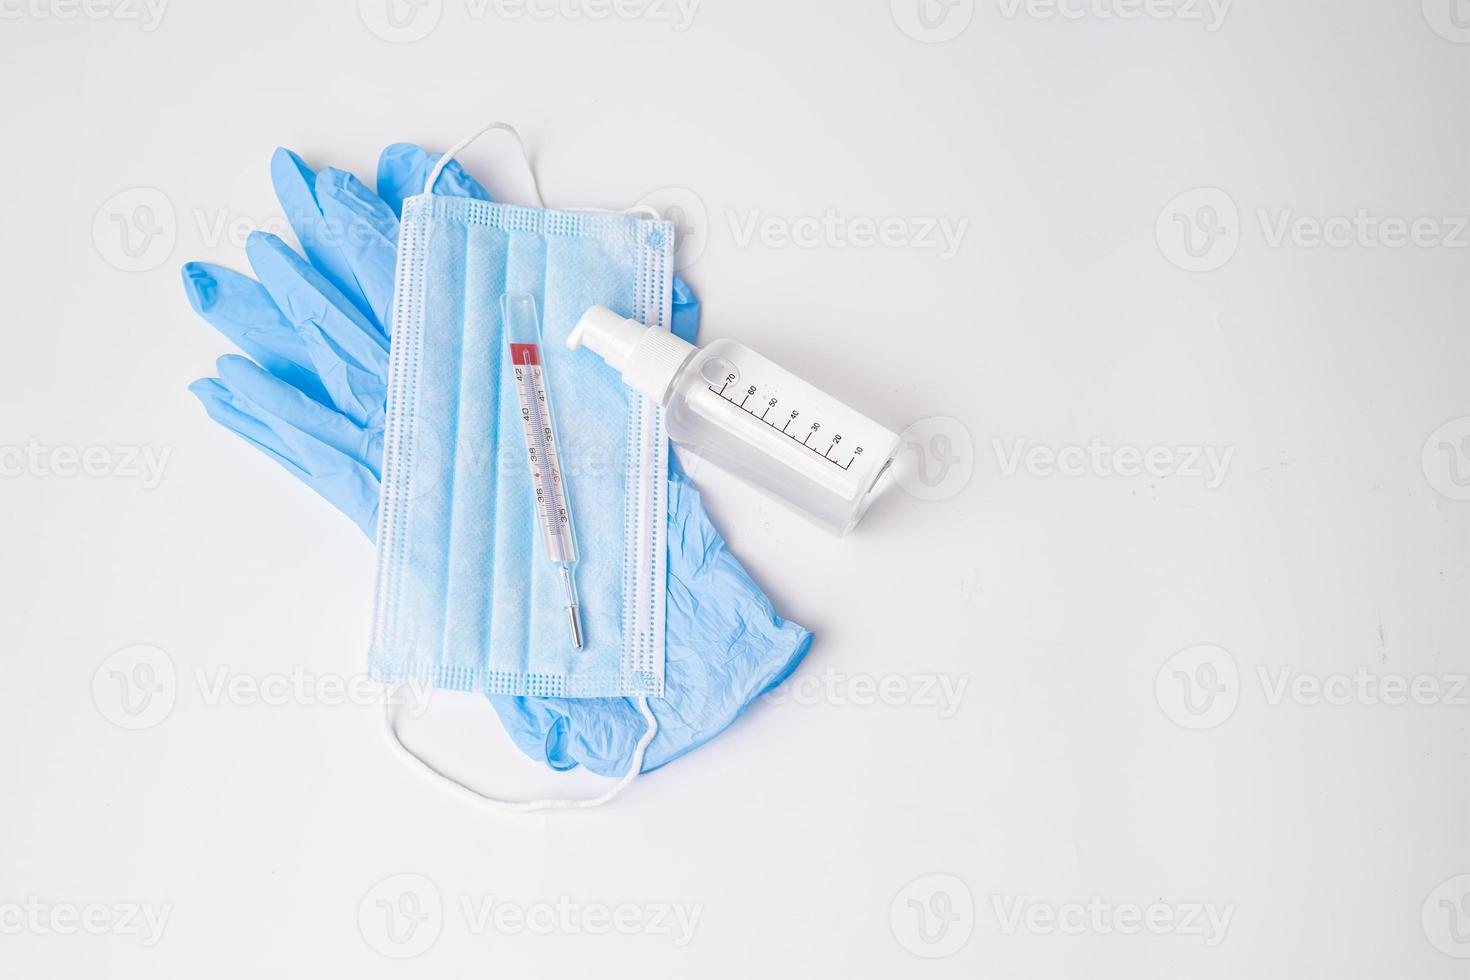 Nitrile gloves with hydroalcoholic gel surgical mask and thermometer photo